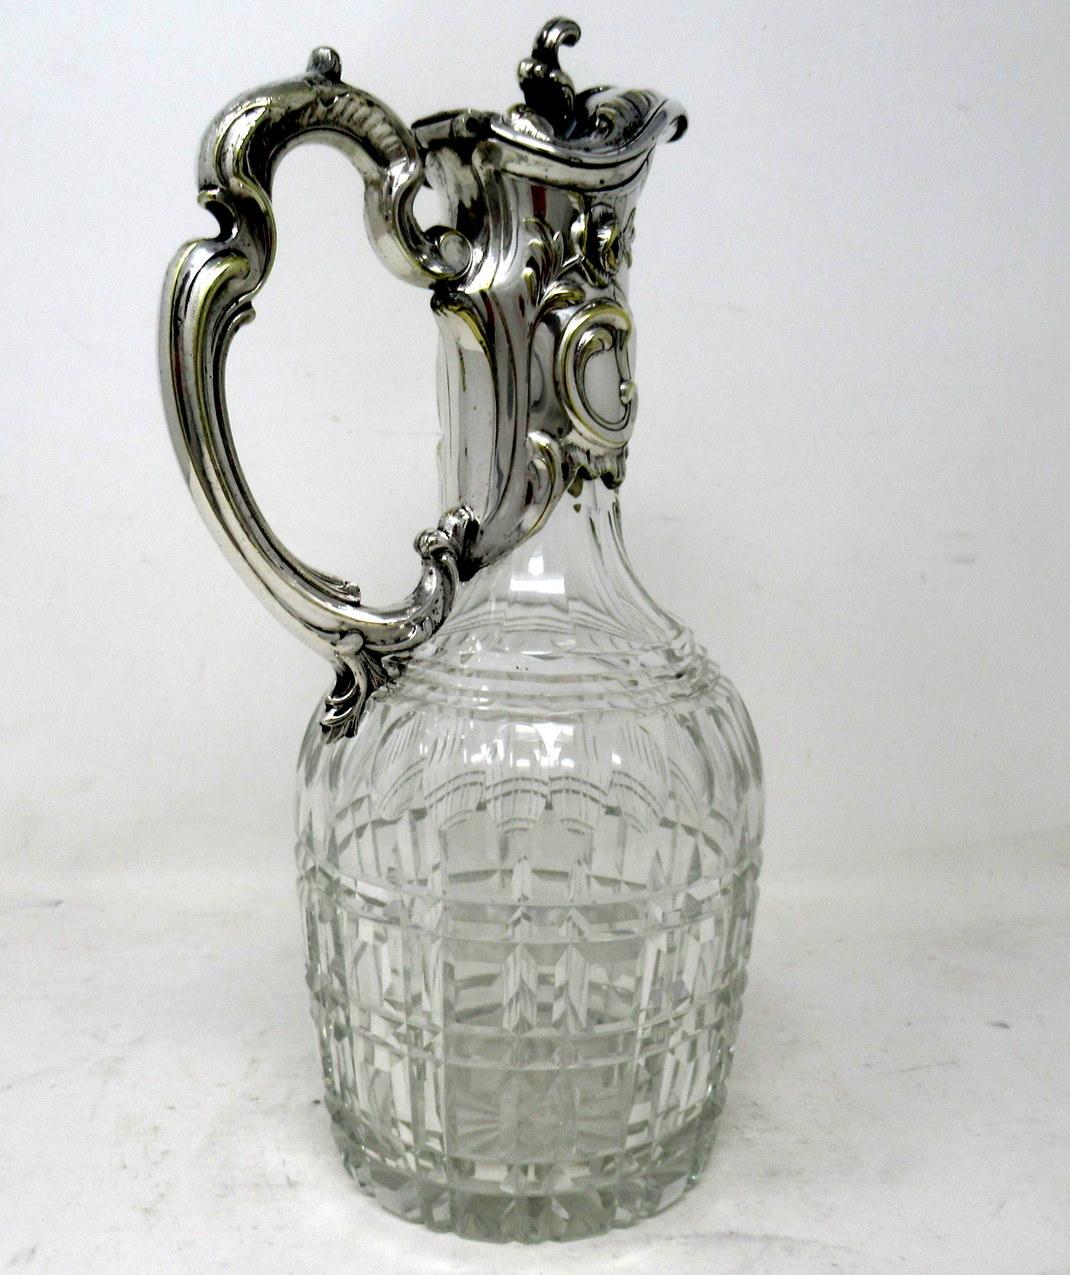 19th Century Antique Victorian English Cut Crystal Silver Plated Wine Ewer Claret Jug Pitcher